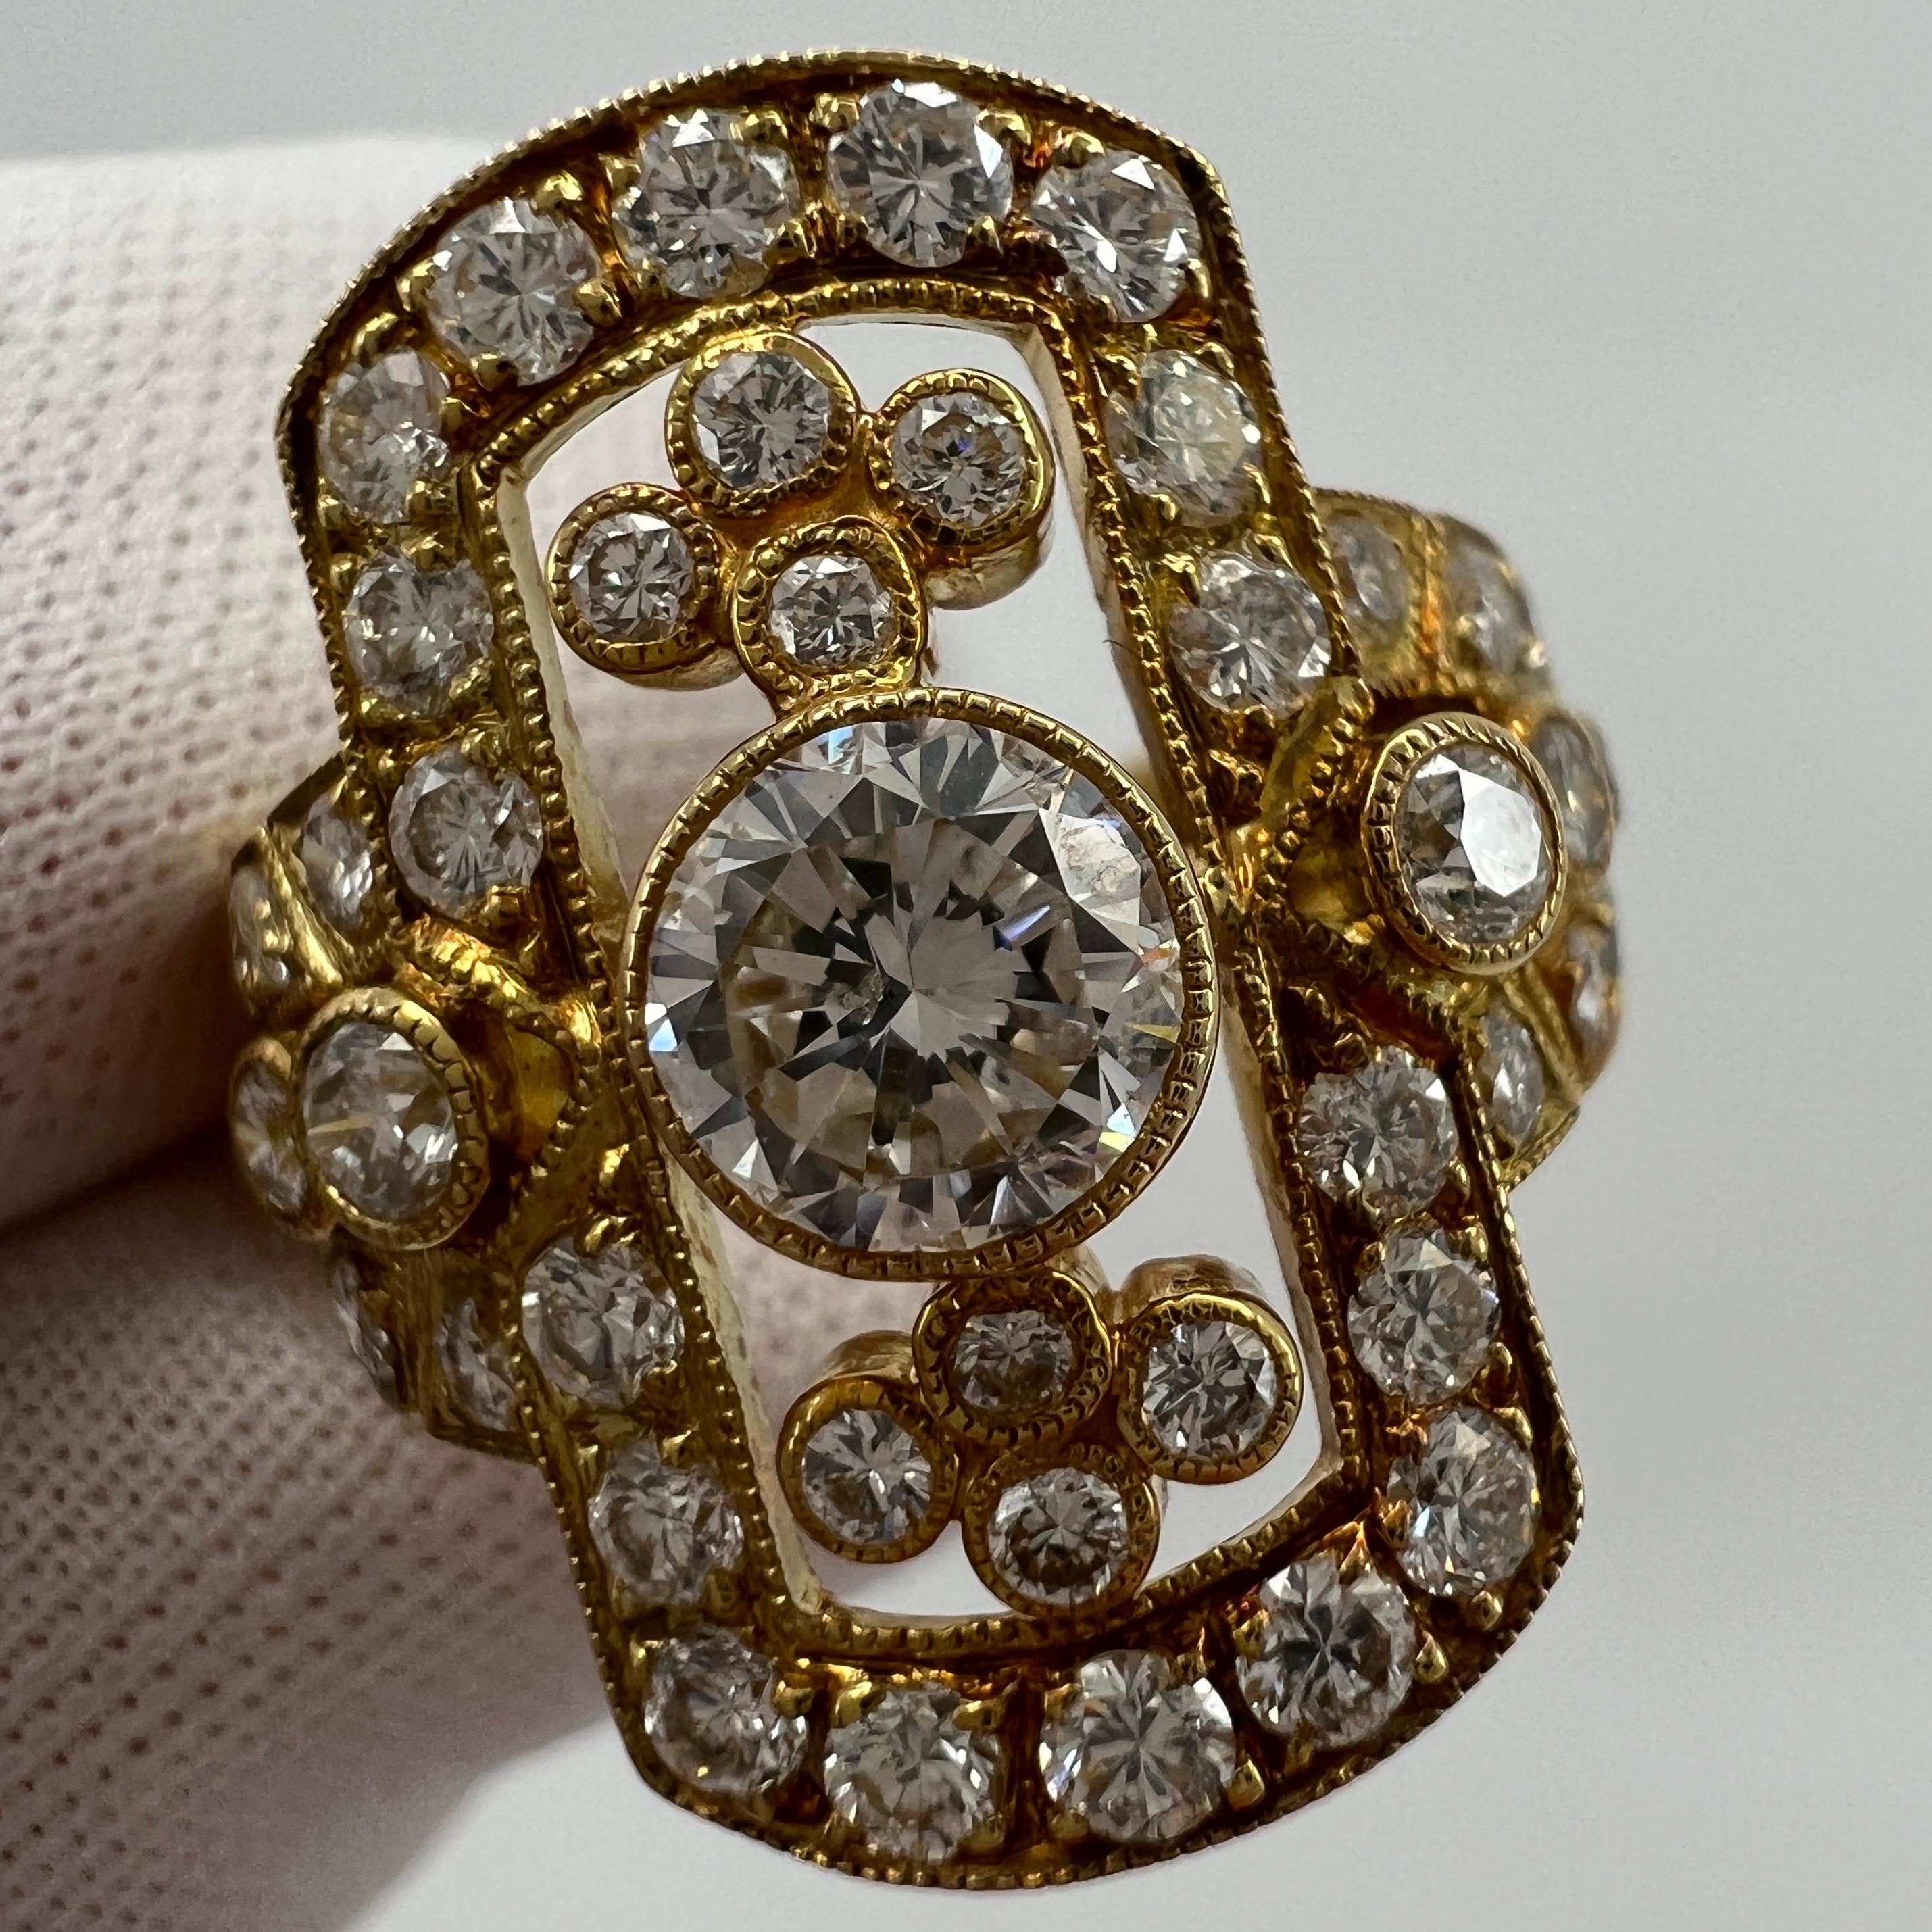 Fine Art Deco Style Diamond Cluster 18k Yellow Gold Handmade Ring.

A beautiful and unique handmade art deco ring with millgrain borders and highlights.

This extravagantly styled ring features 1.702 total carat of white round brilliant cut